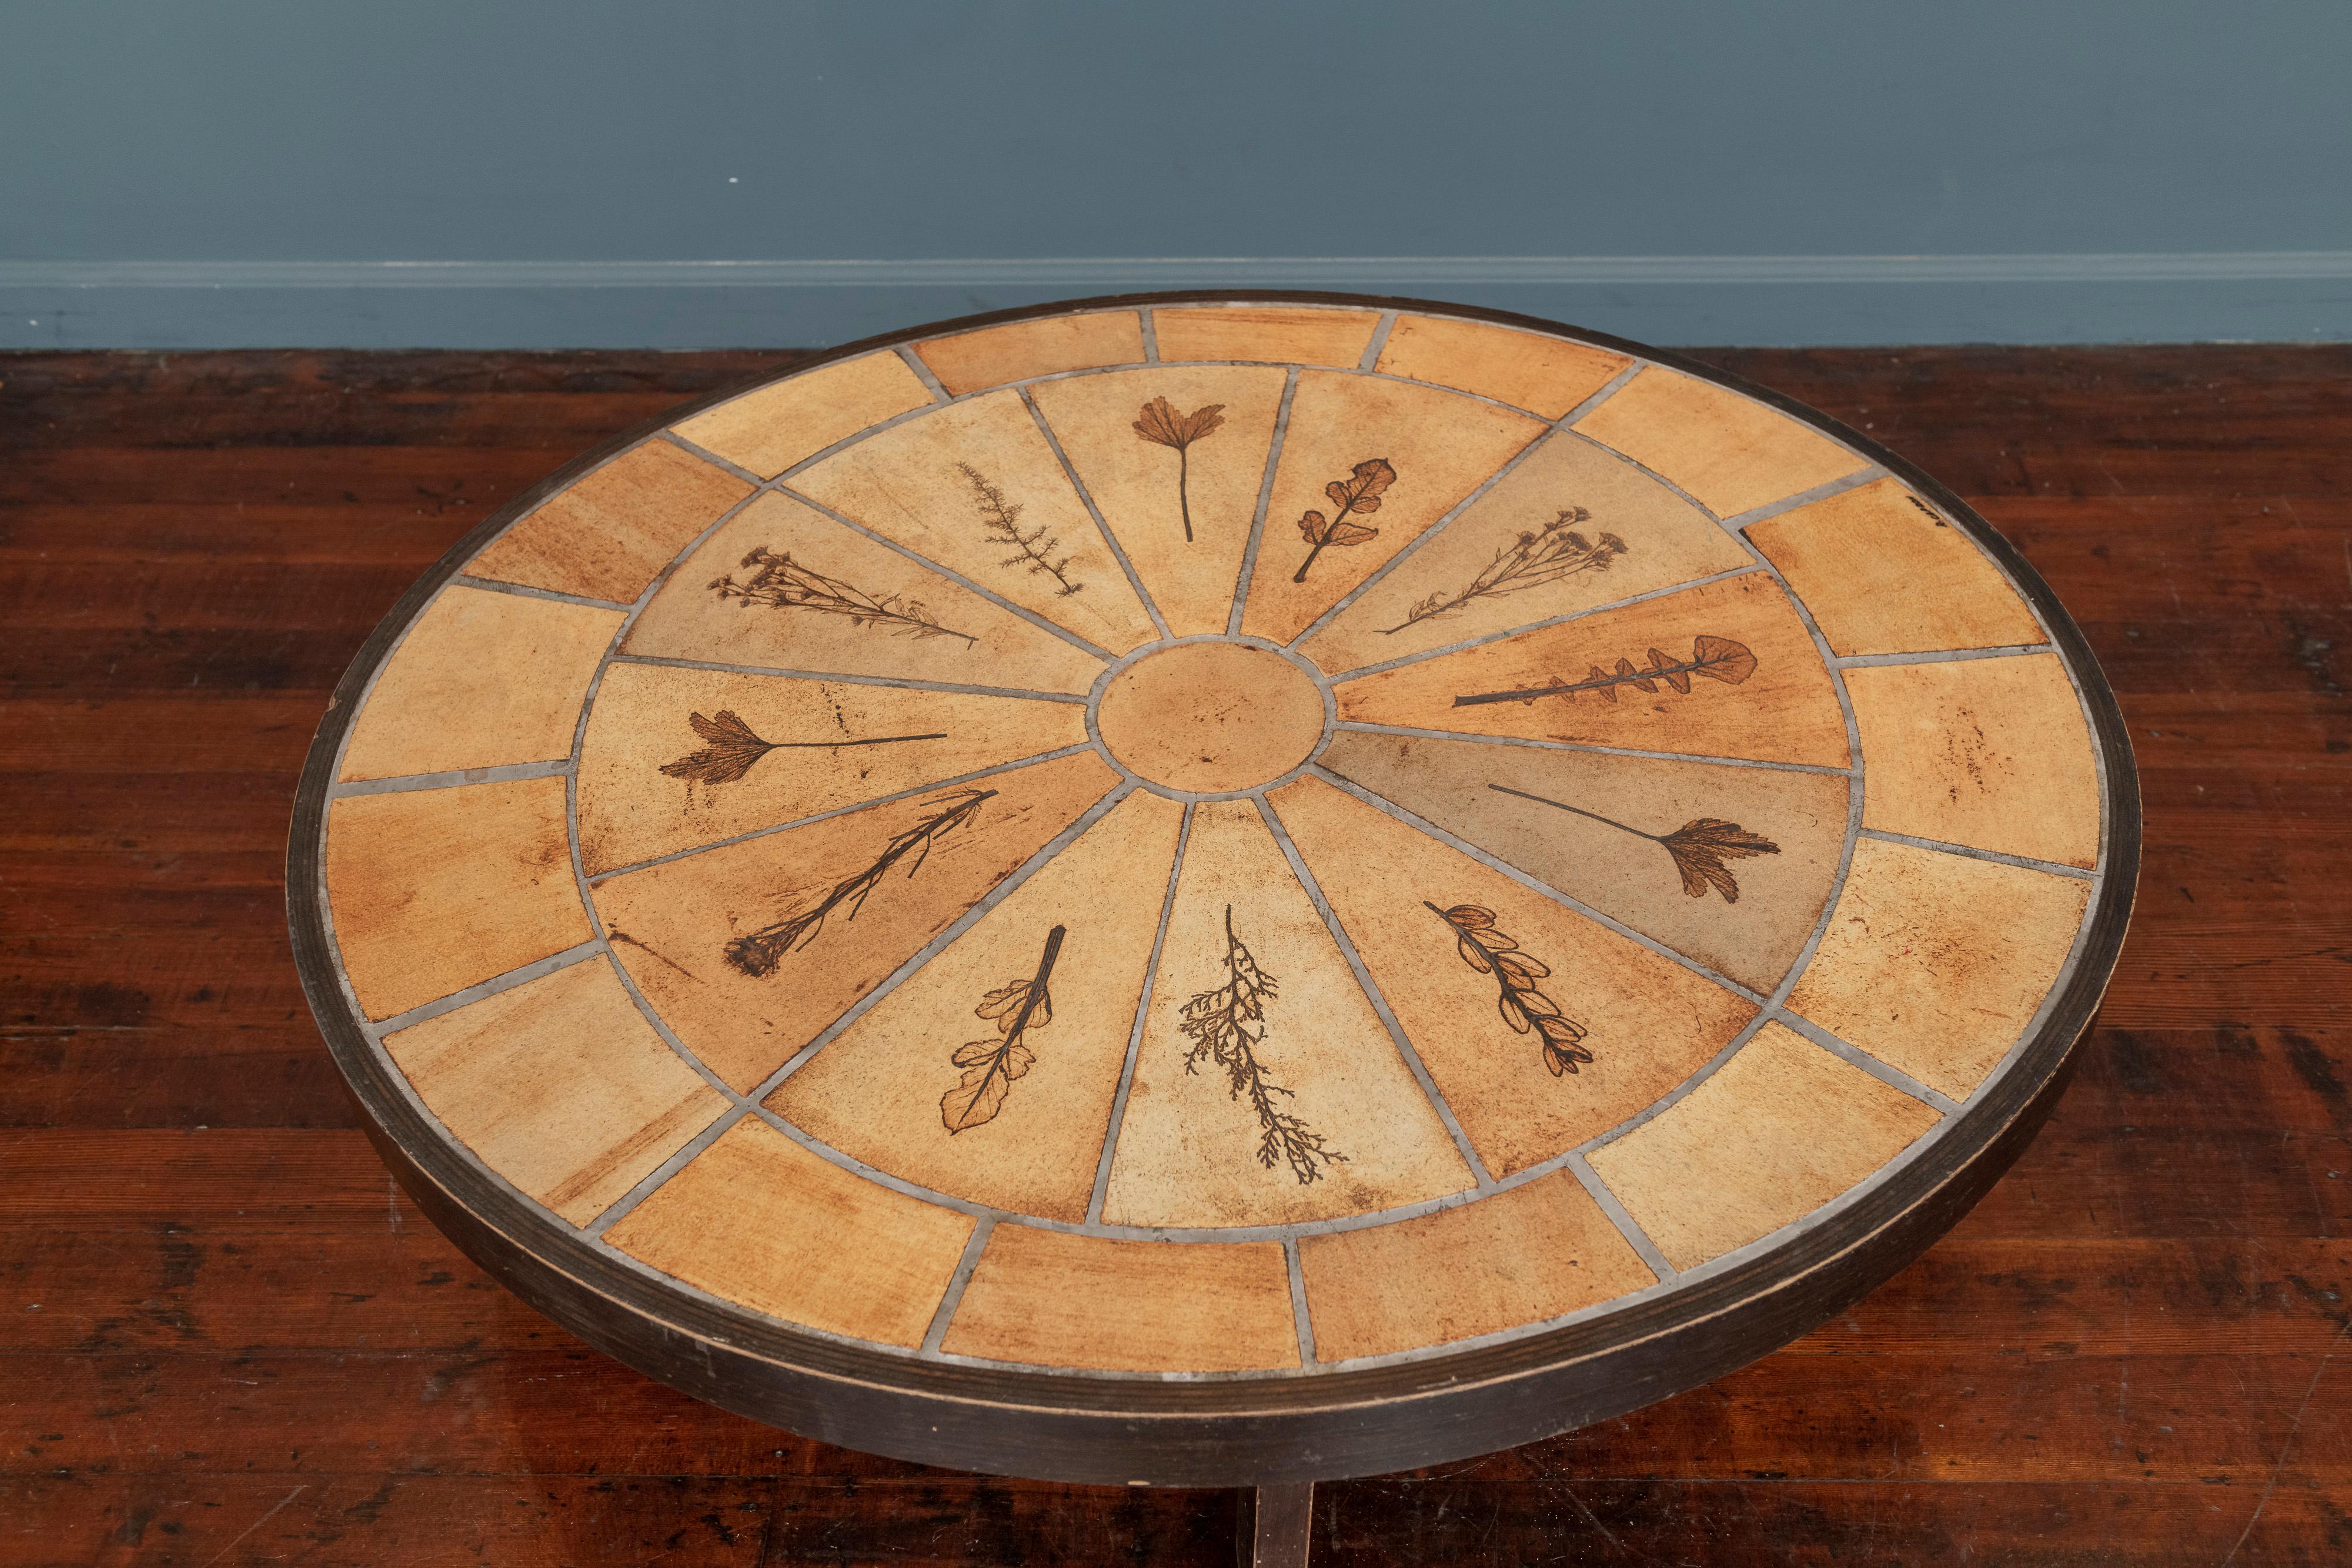 Roger Capron design ceramic oval Gres des Garrigues coffee table, France. Organic nature motif with impressed herbs and flowers into a decorative oval top on a stained banded top on opposing legs, signed.